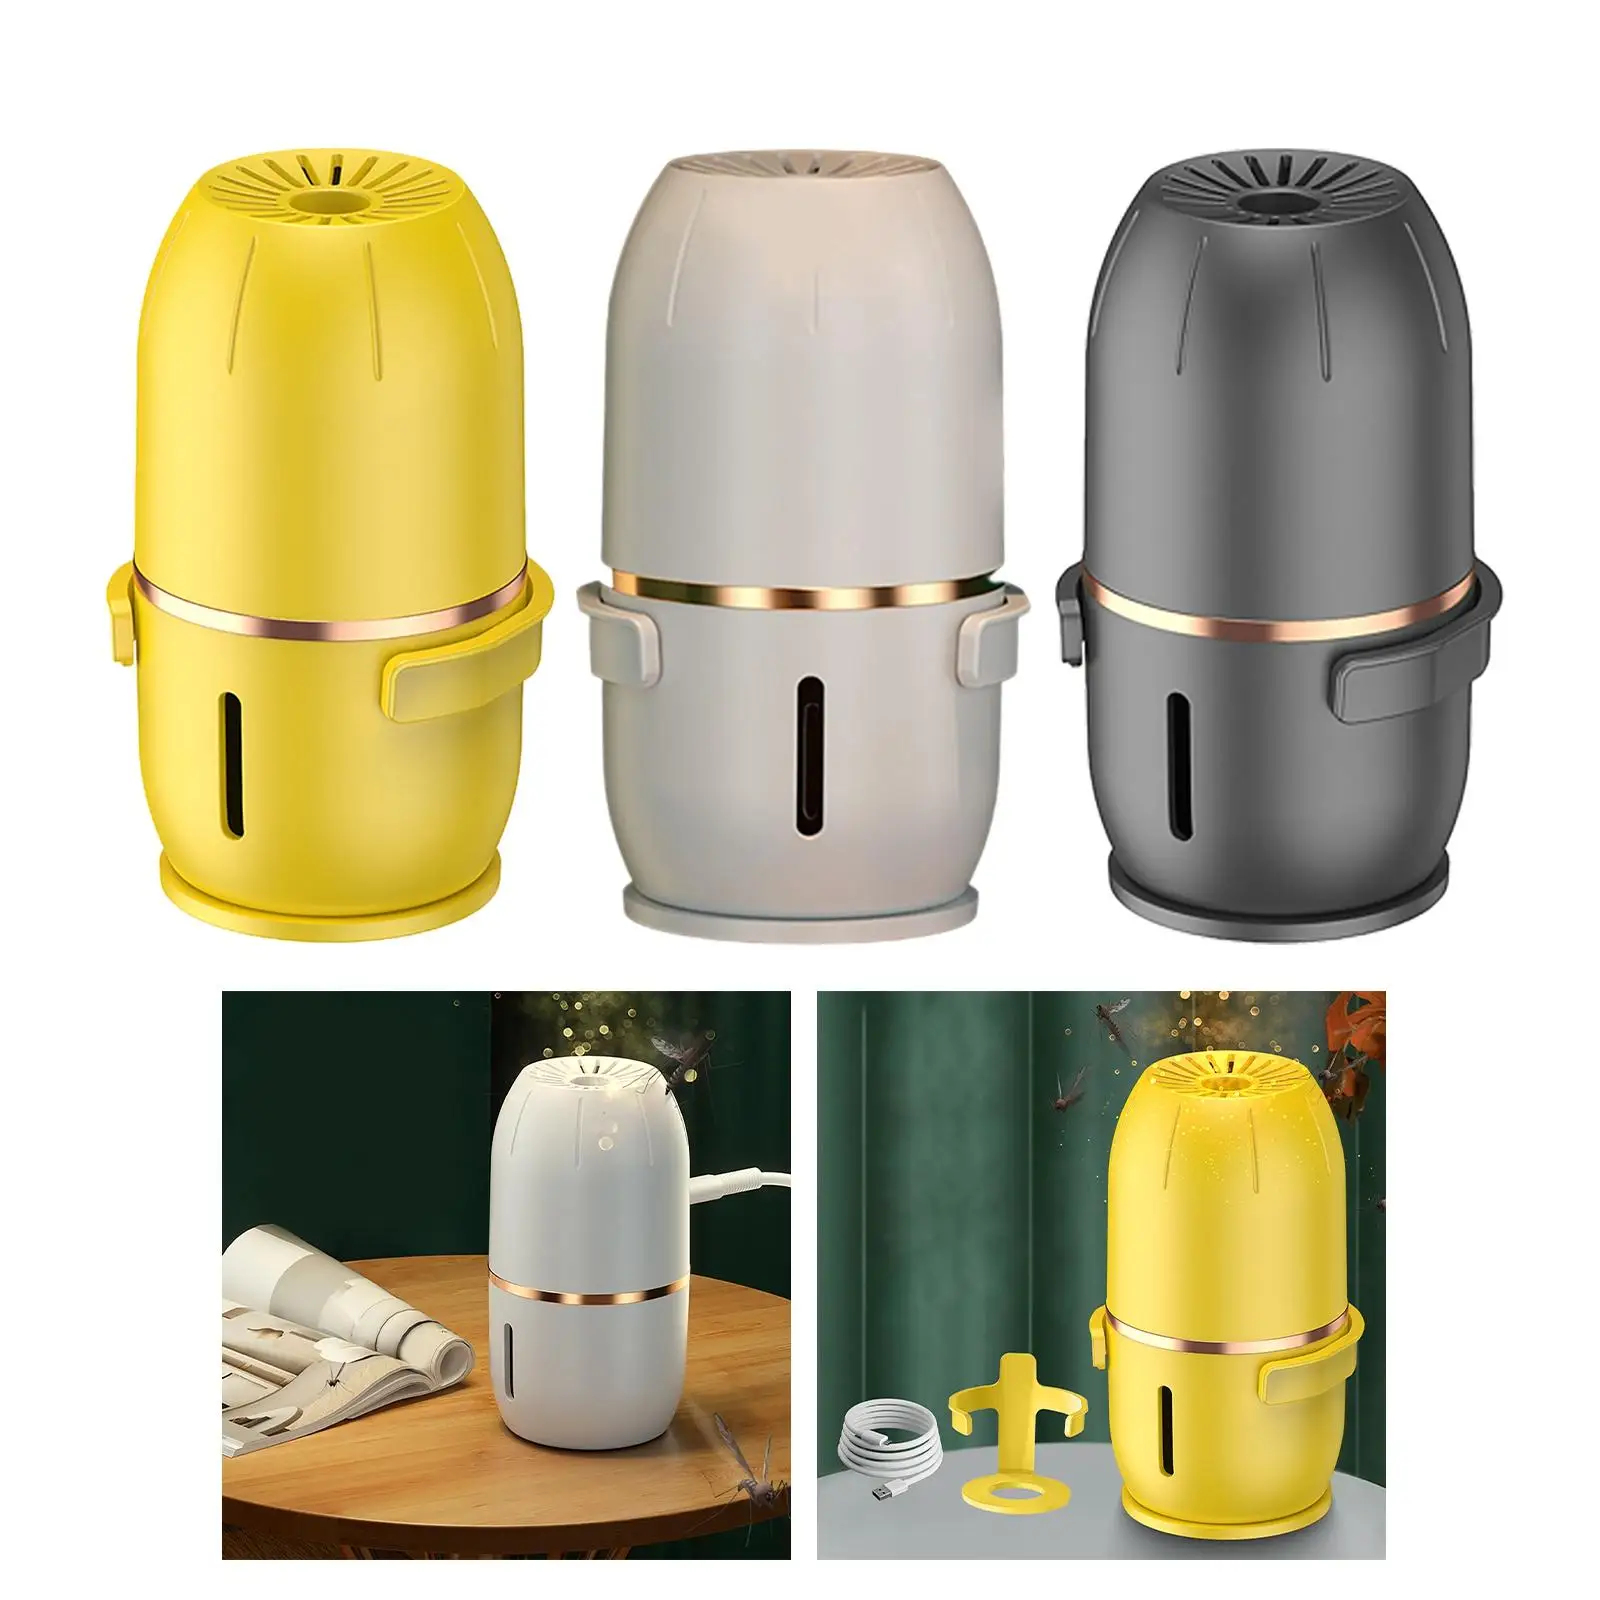 Portable Mosquito Repellence Fly Killer USB Rechargeable Mosquito Trap Pest Repellers Low Noise for Bedrooom Office Indoor